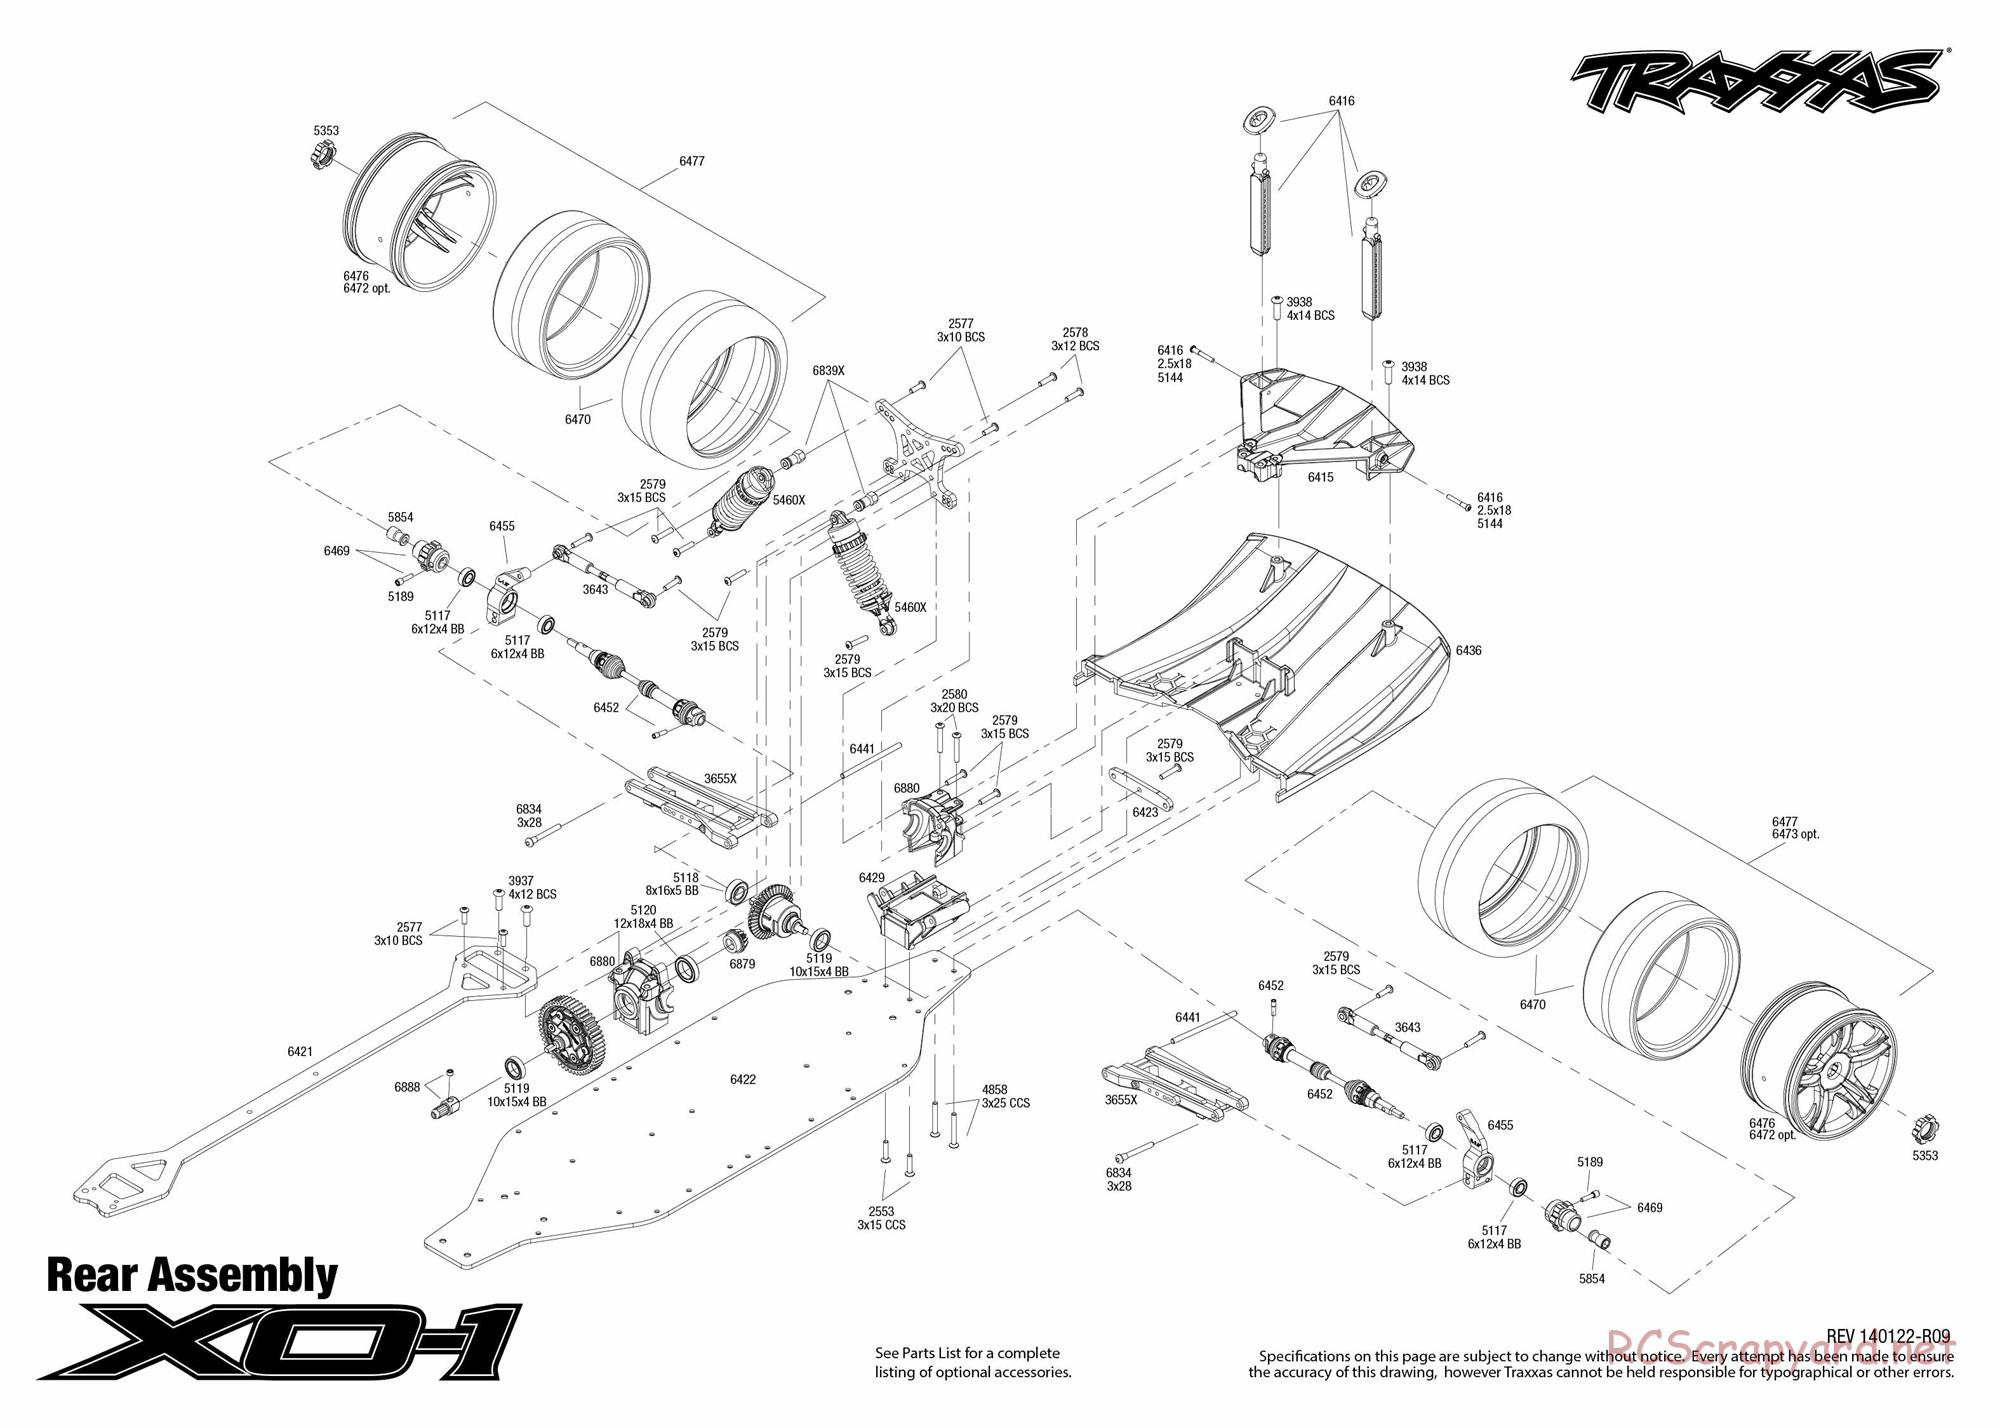 Traxxas - XO-1 (2011) - Exploded Views - Page 4